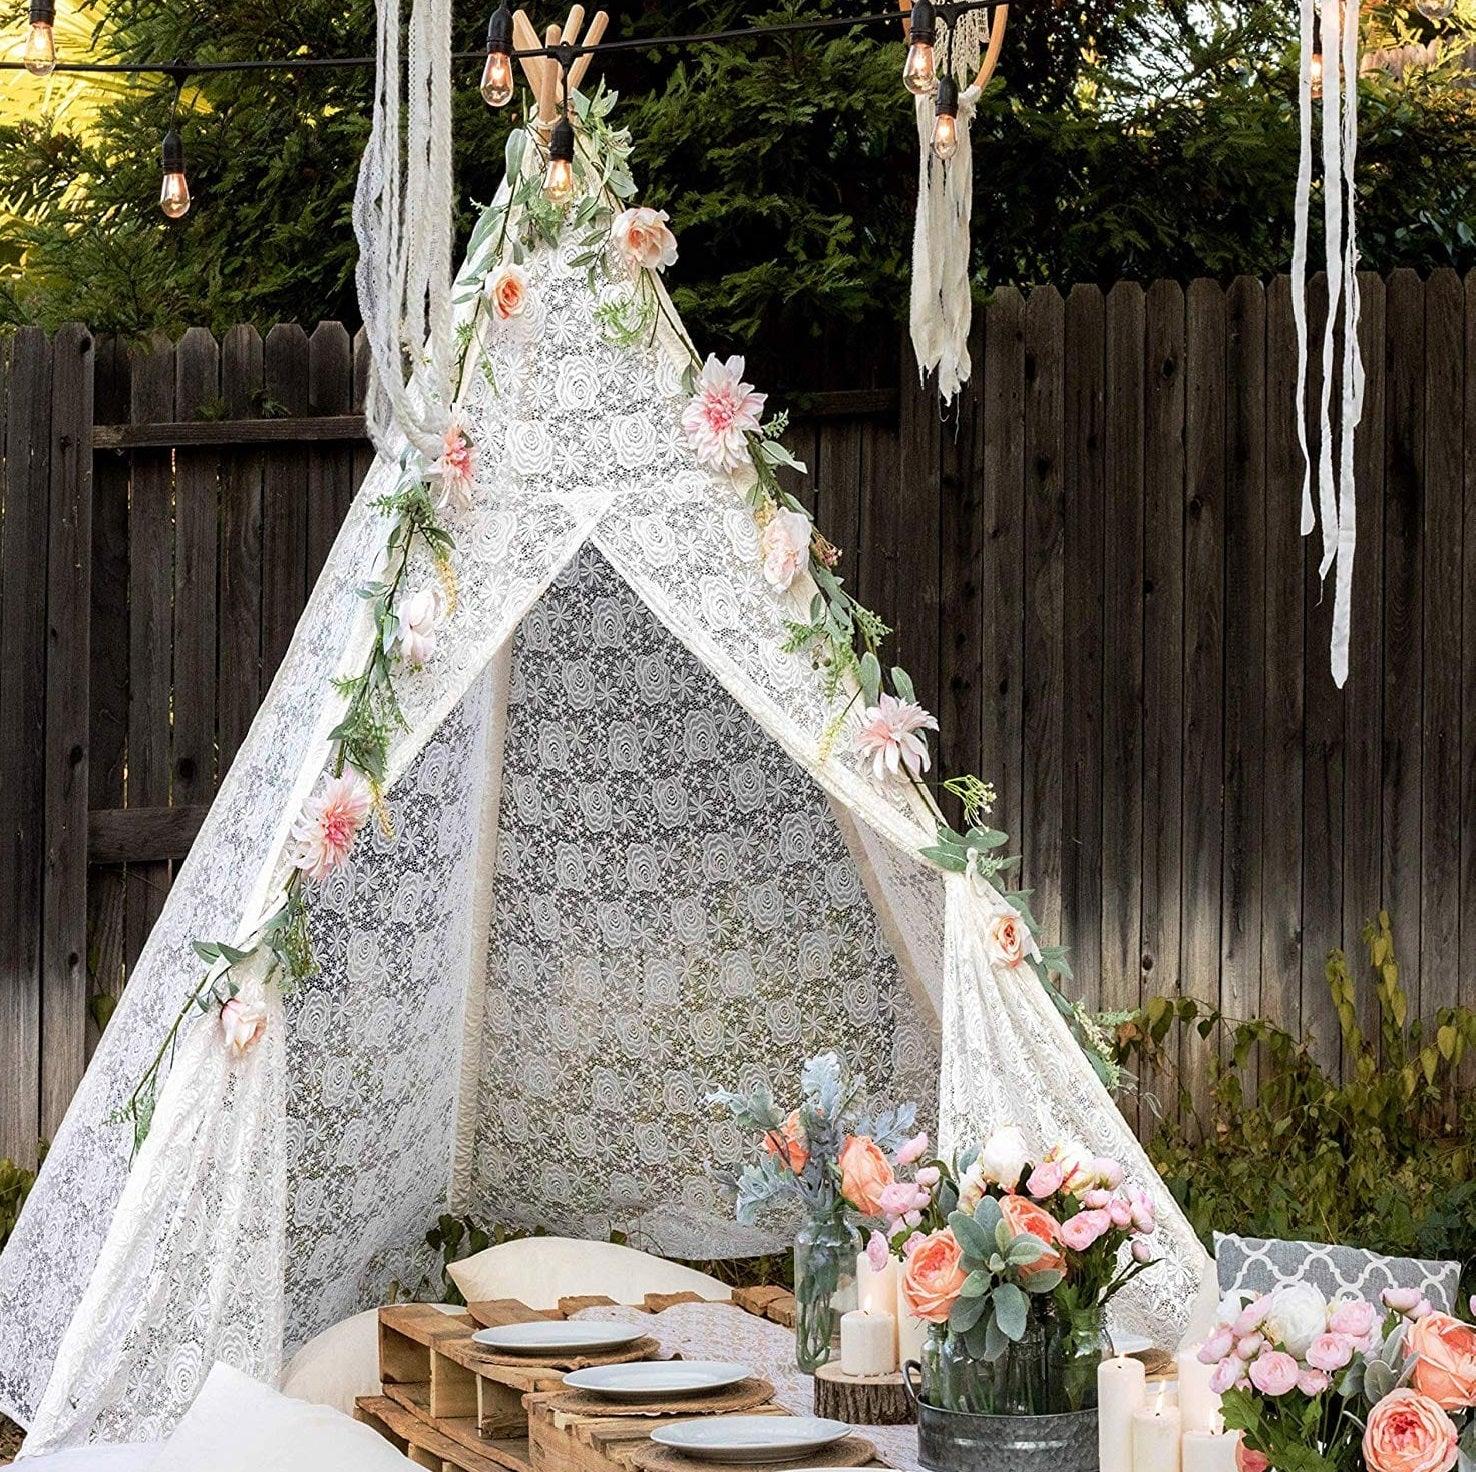 PETIT Lace Teepee With Mat and Lights - Kids Haven